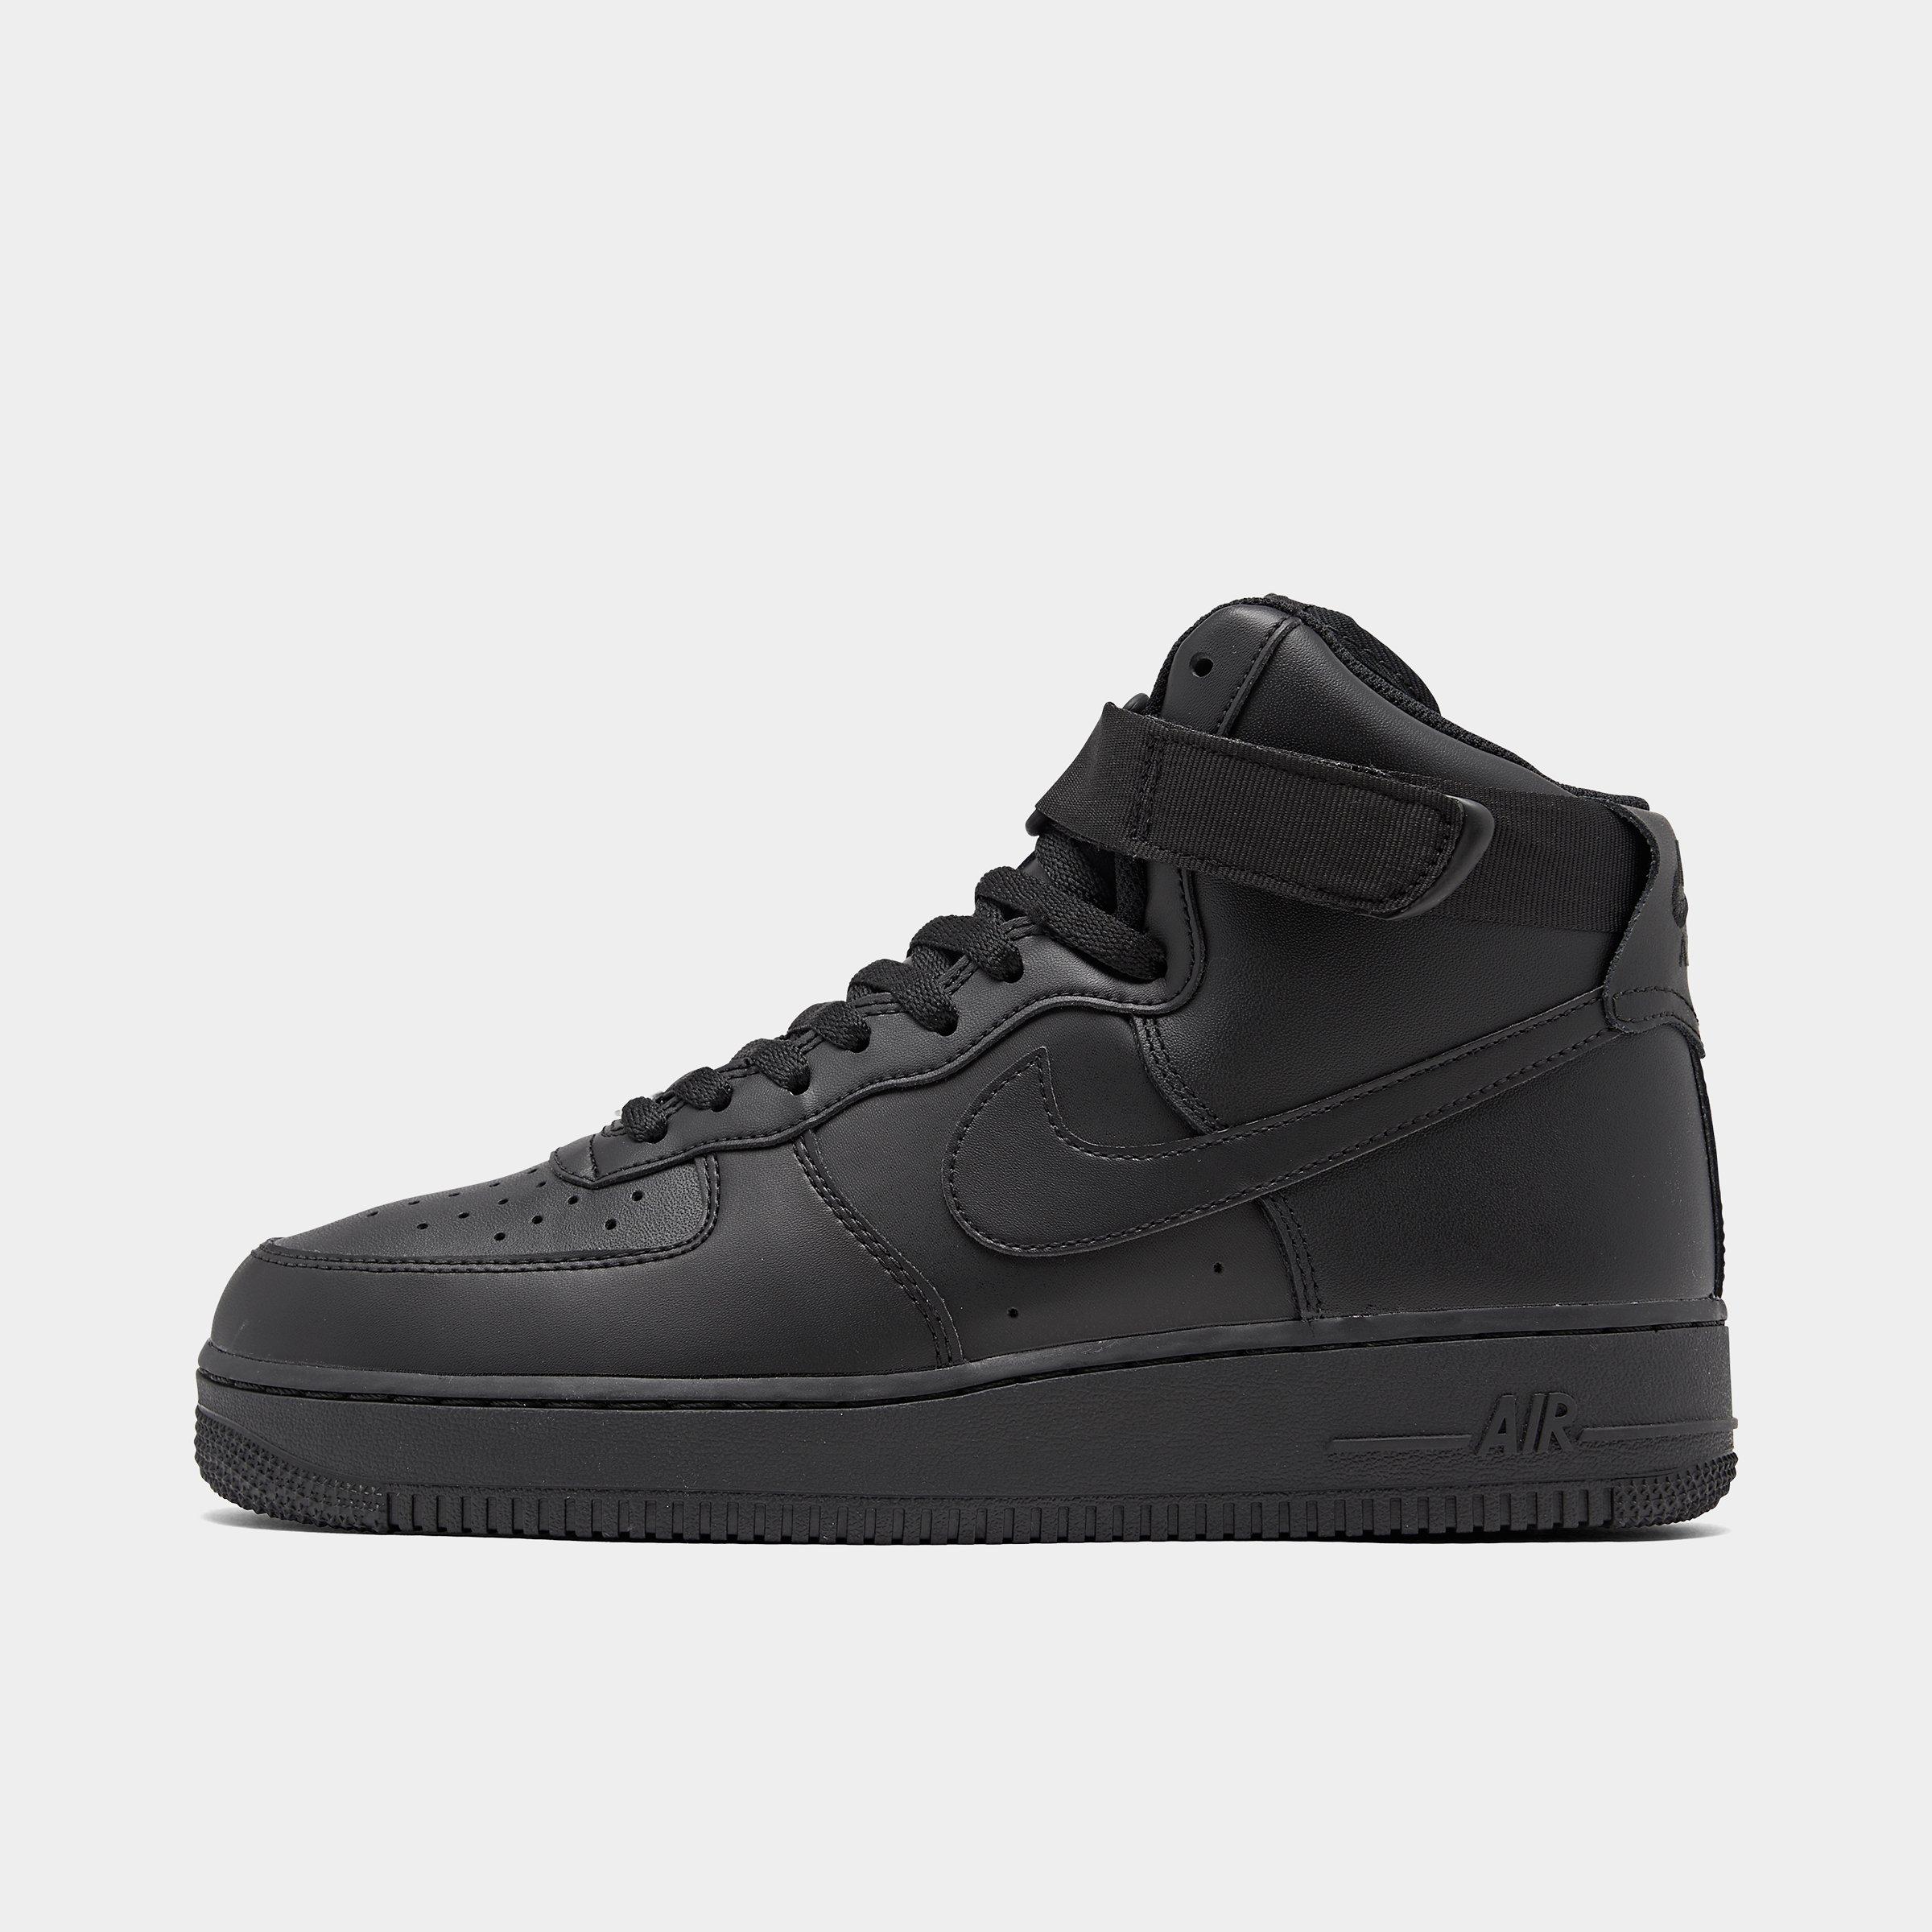 air force 1s finish line